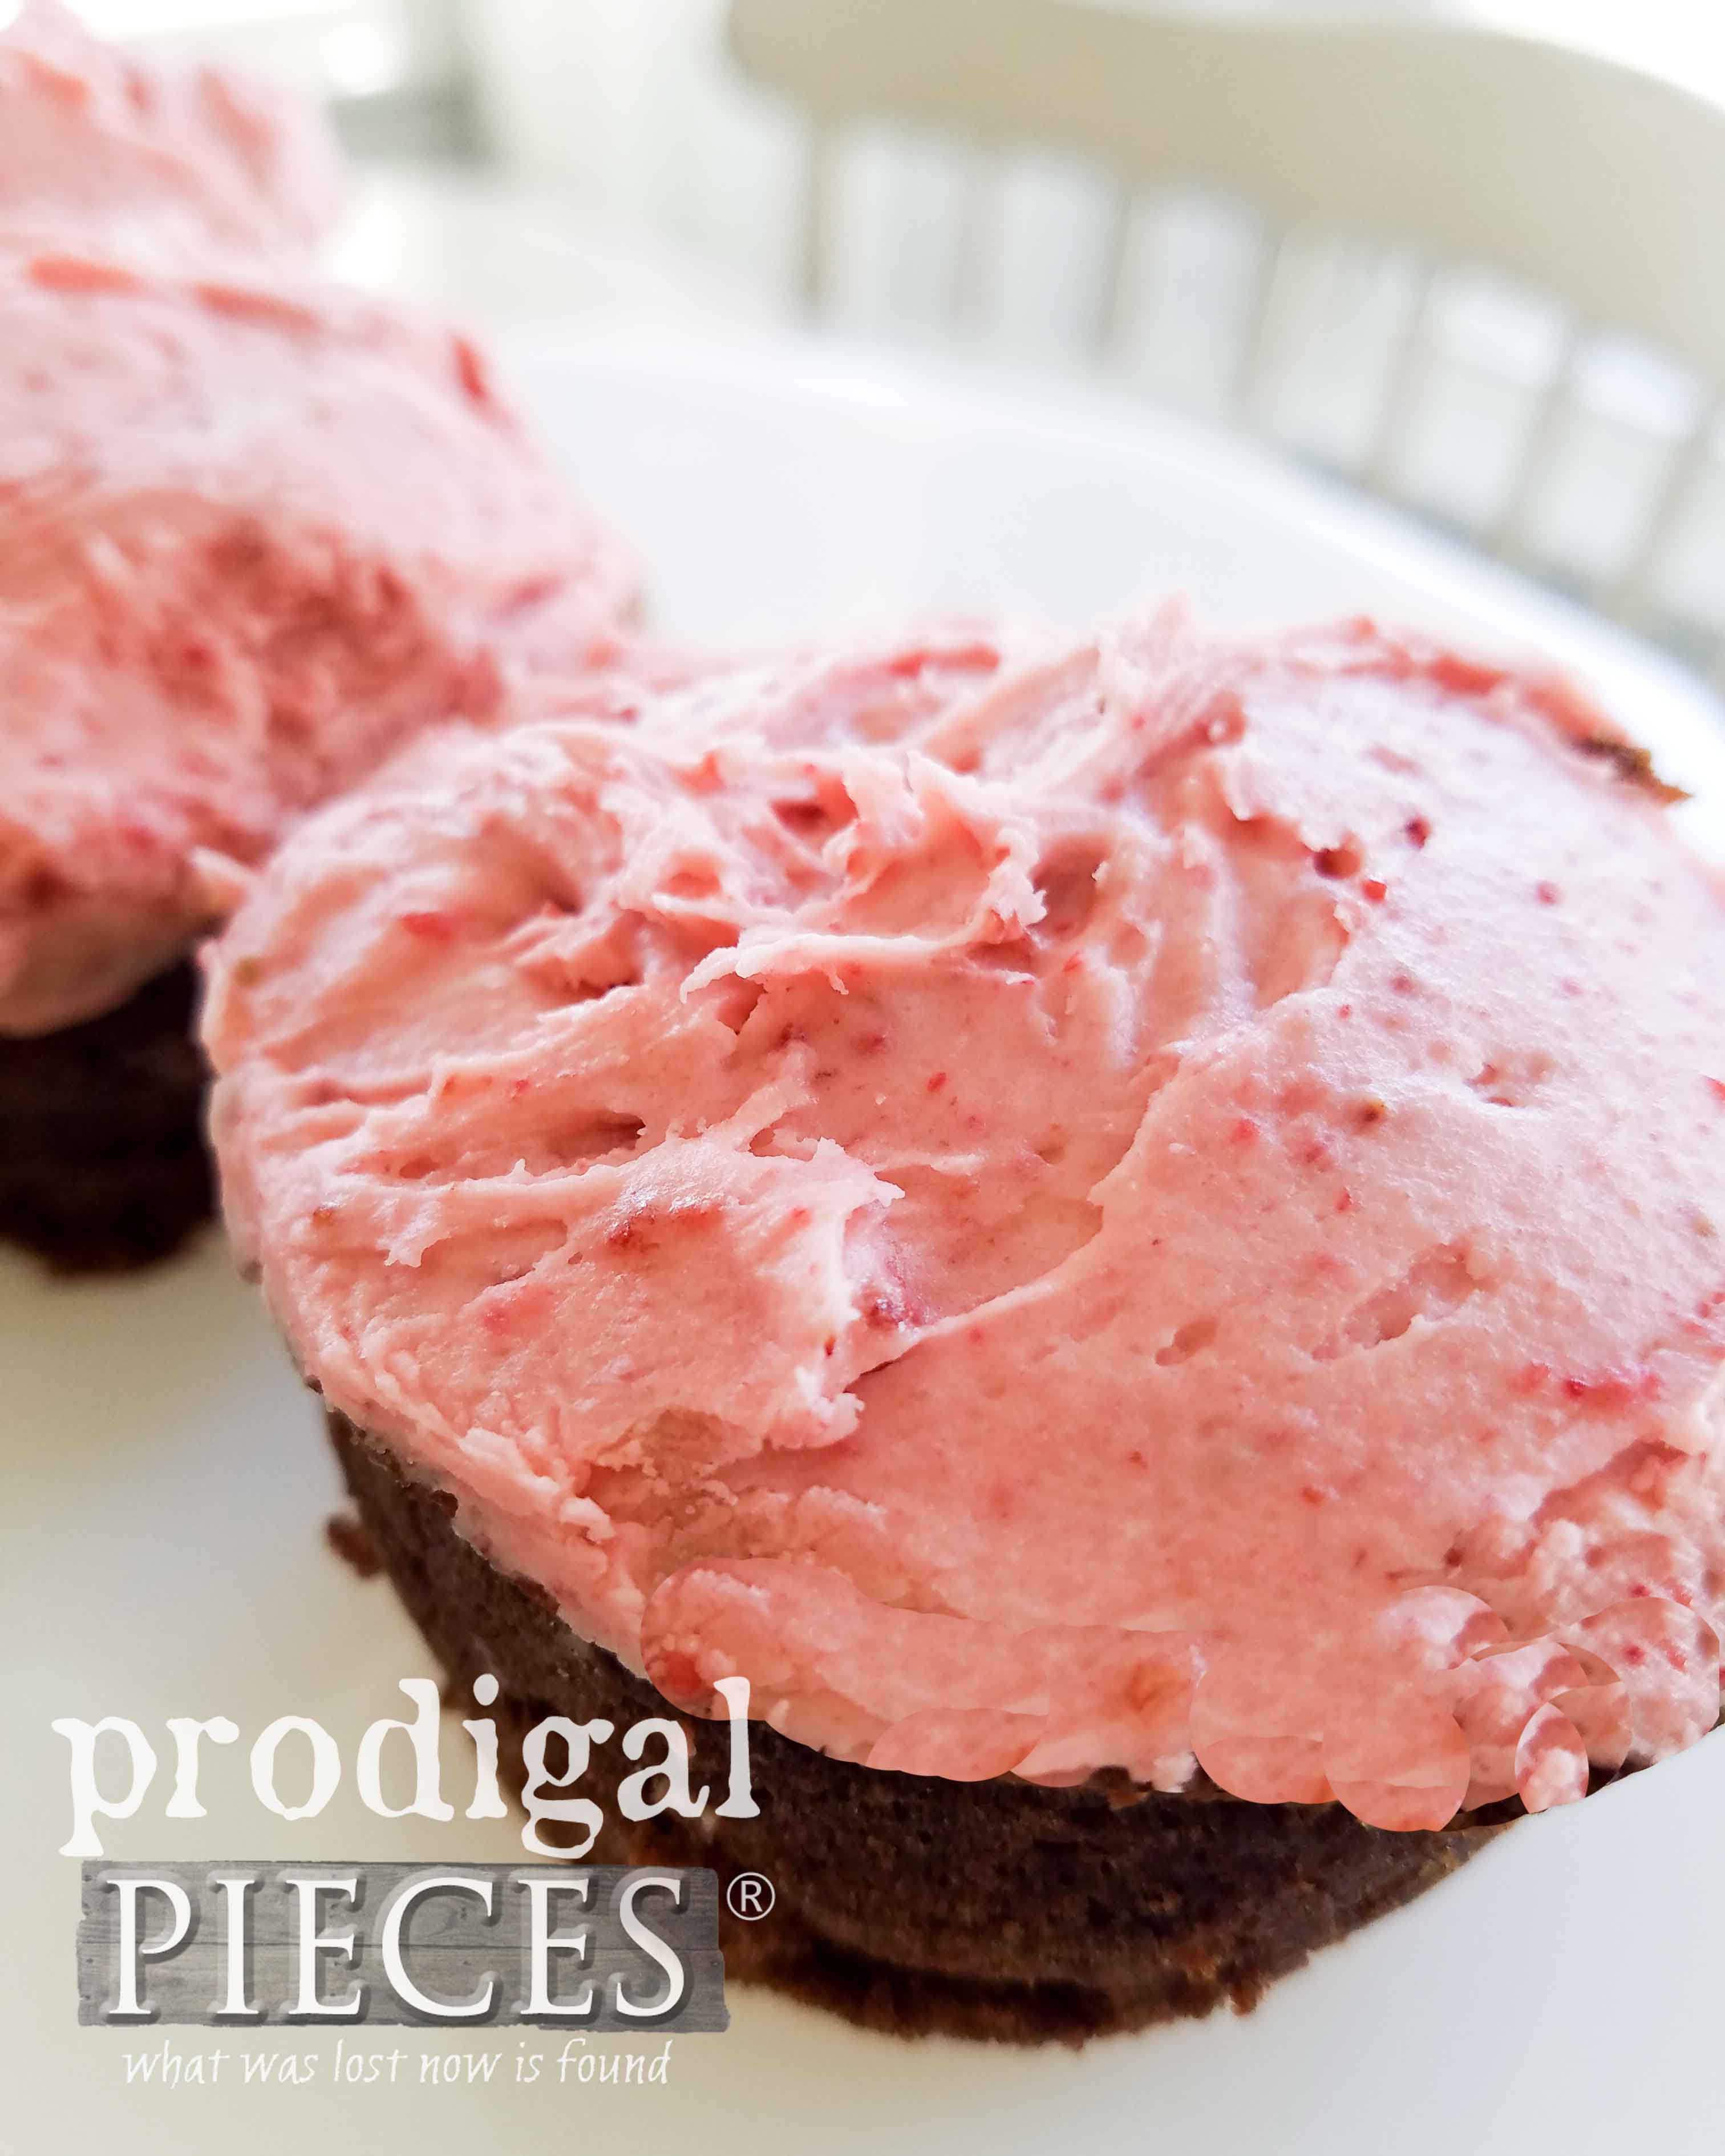 Real Strawberry Buttercream Frosting on Grain-Free Chocolate Cupcakes. A delicious treat! Recipe by Larissa of Prodigal Pieces | prodigalpieces.com